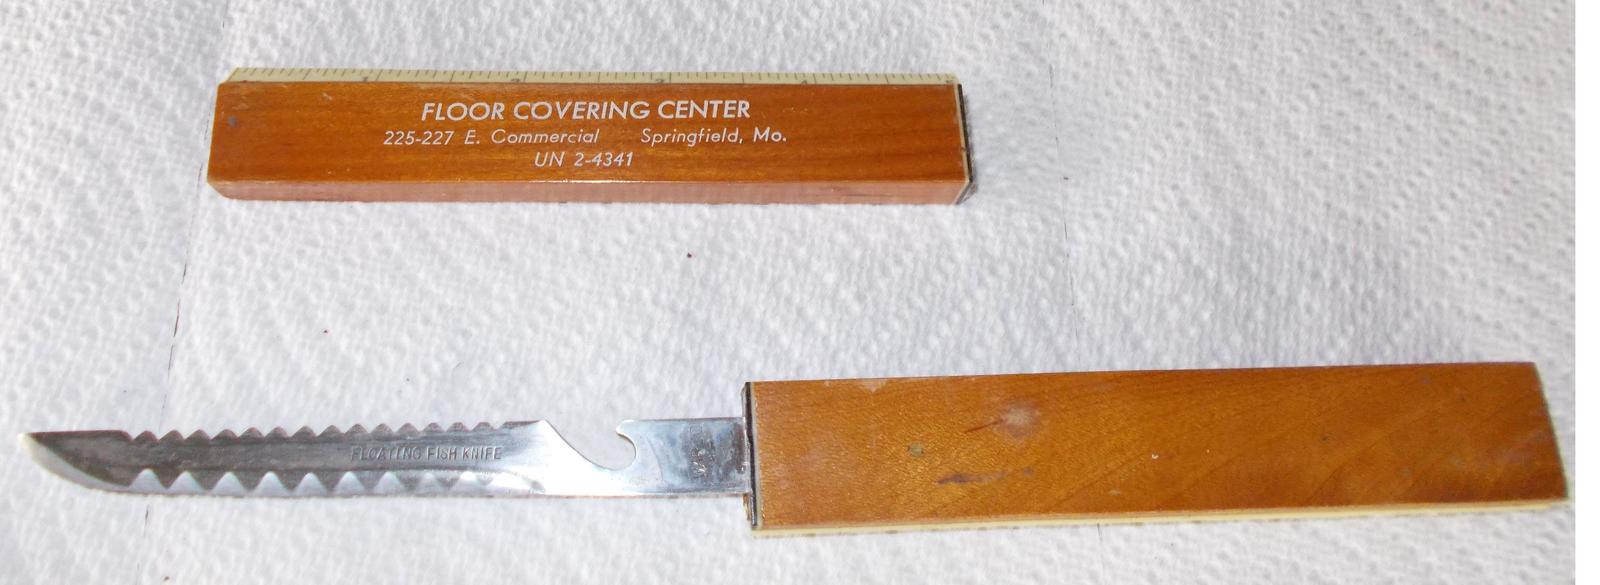 1950's FLOATING FISH KNIFE/RULER-SPRINGFIELD,MO